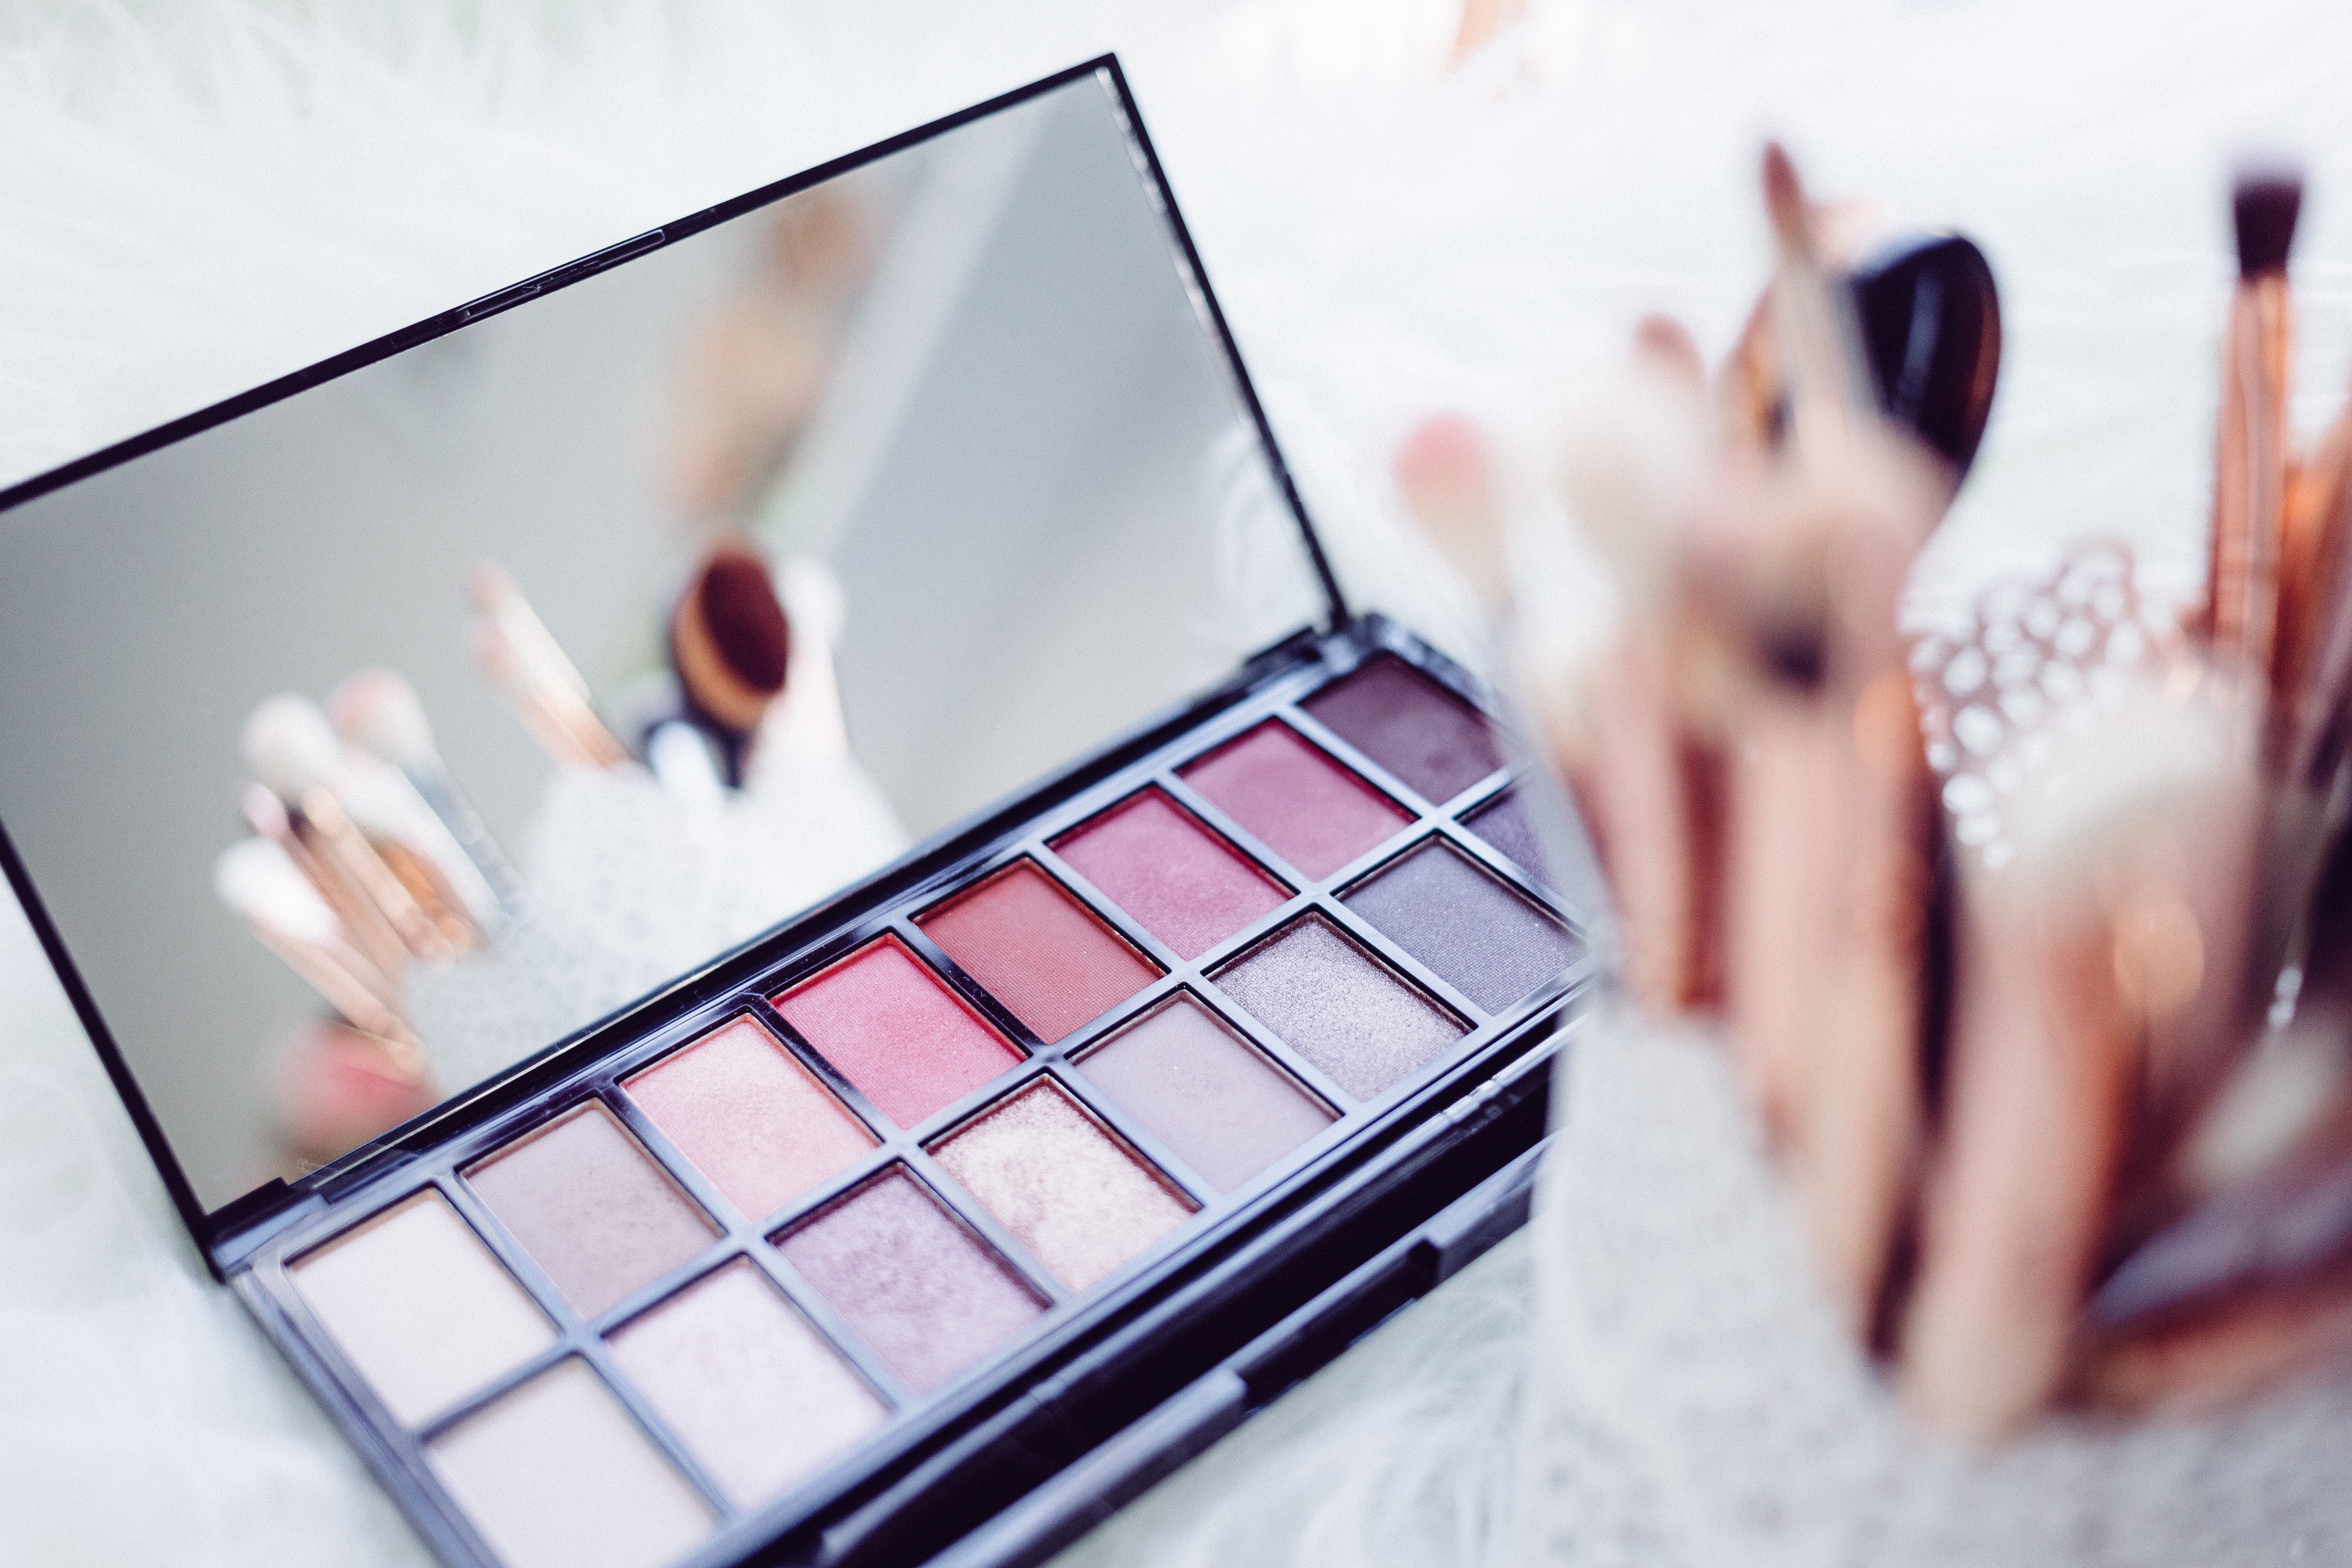 Find Hair And Makeup Artists in   West Perth Get the best prices from 2,000+ of the most reviewed Hair And Makeup Artists  near West Perth. Pick from mobile stylists or salons.